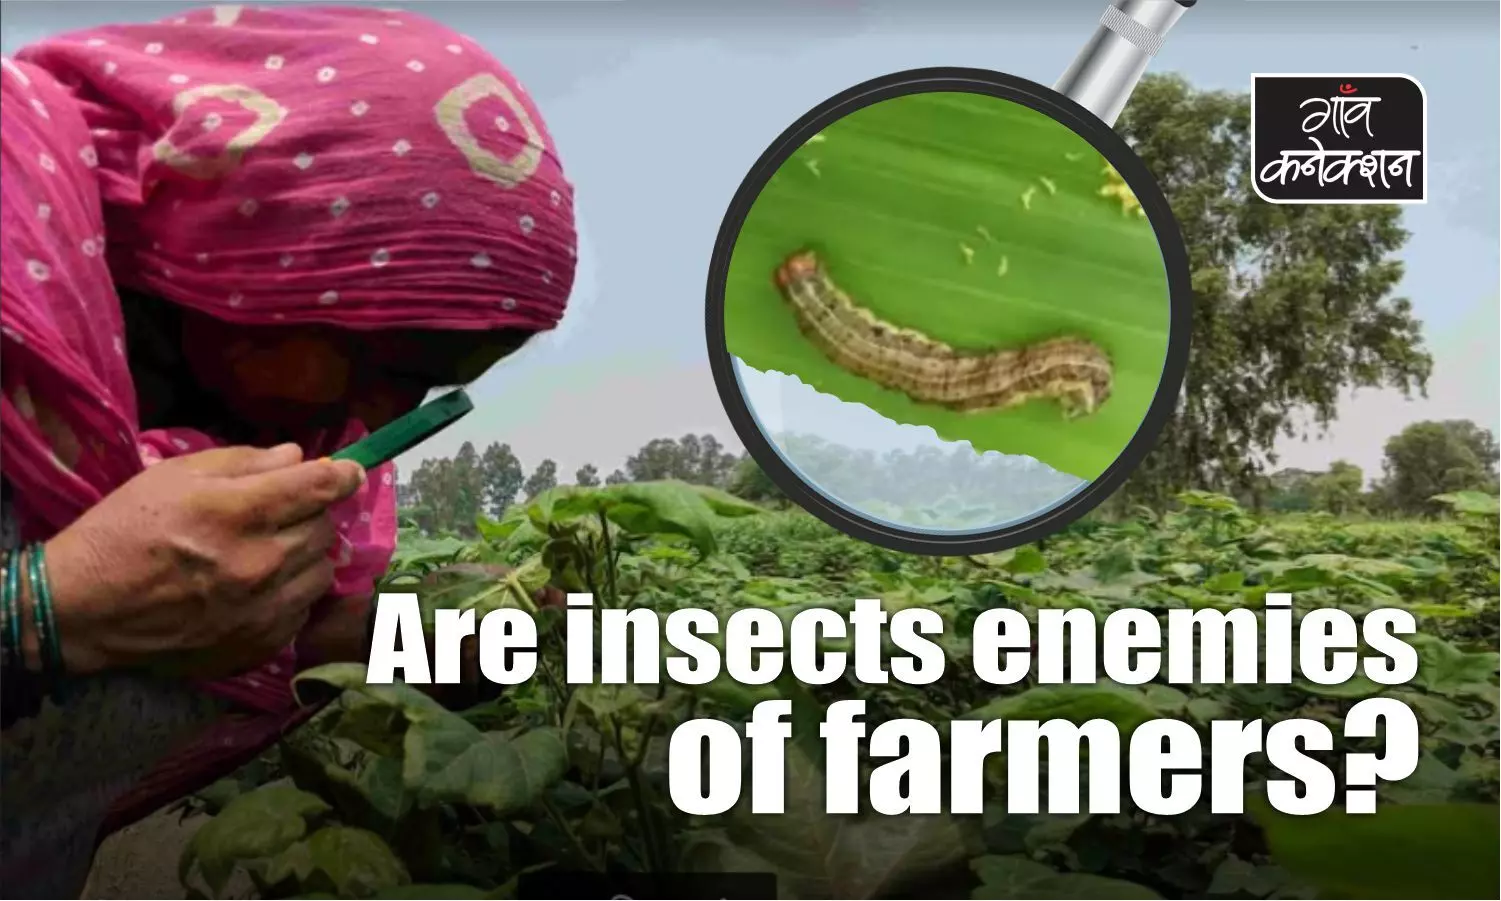 Insects are not farmers enemies, pesticides are